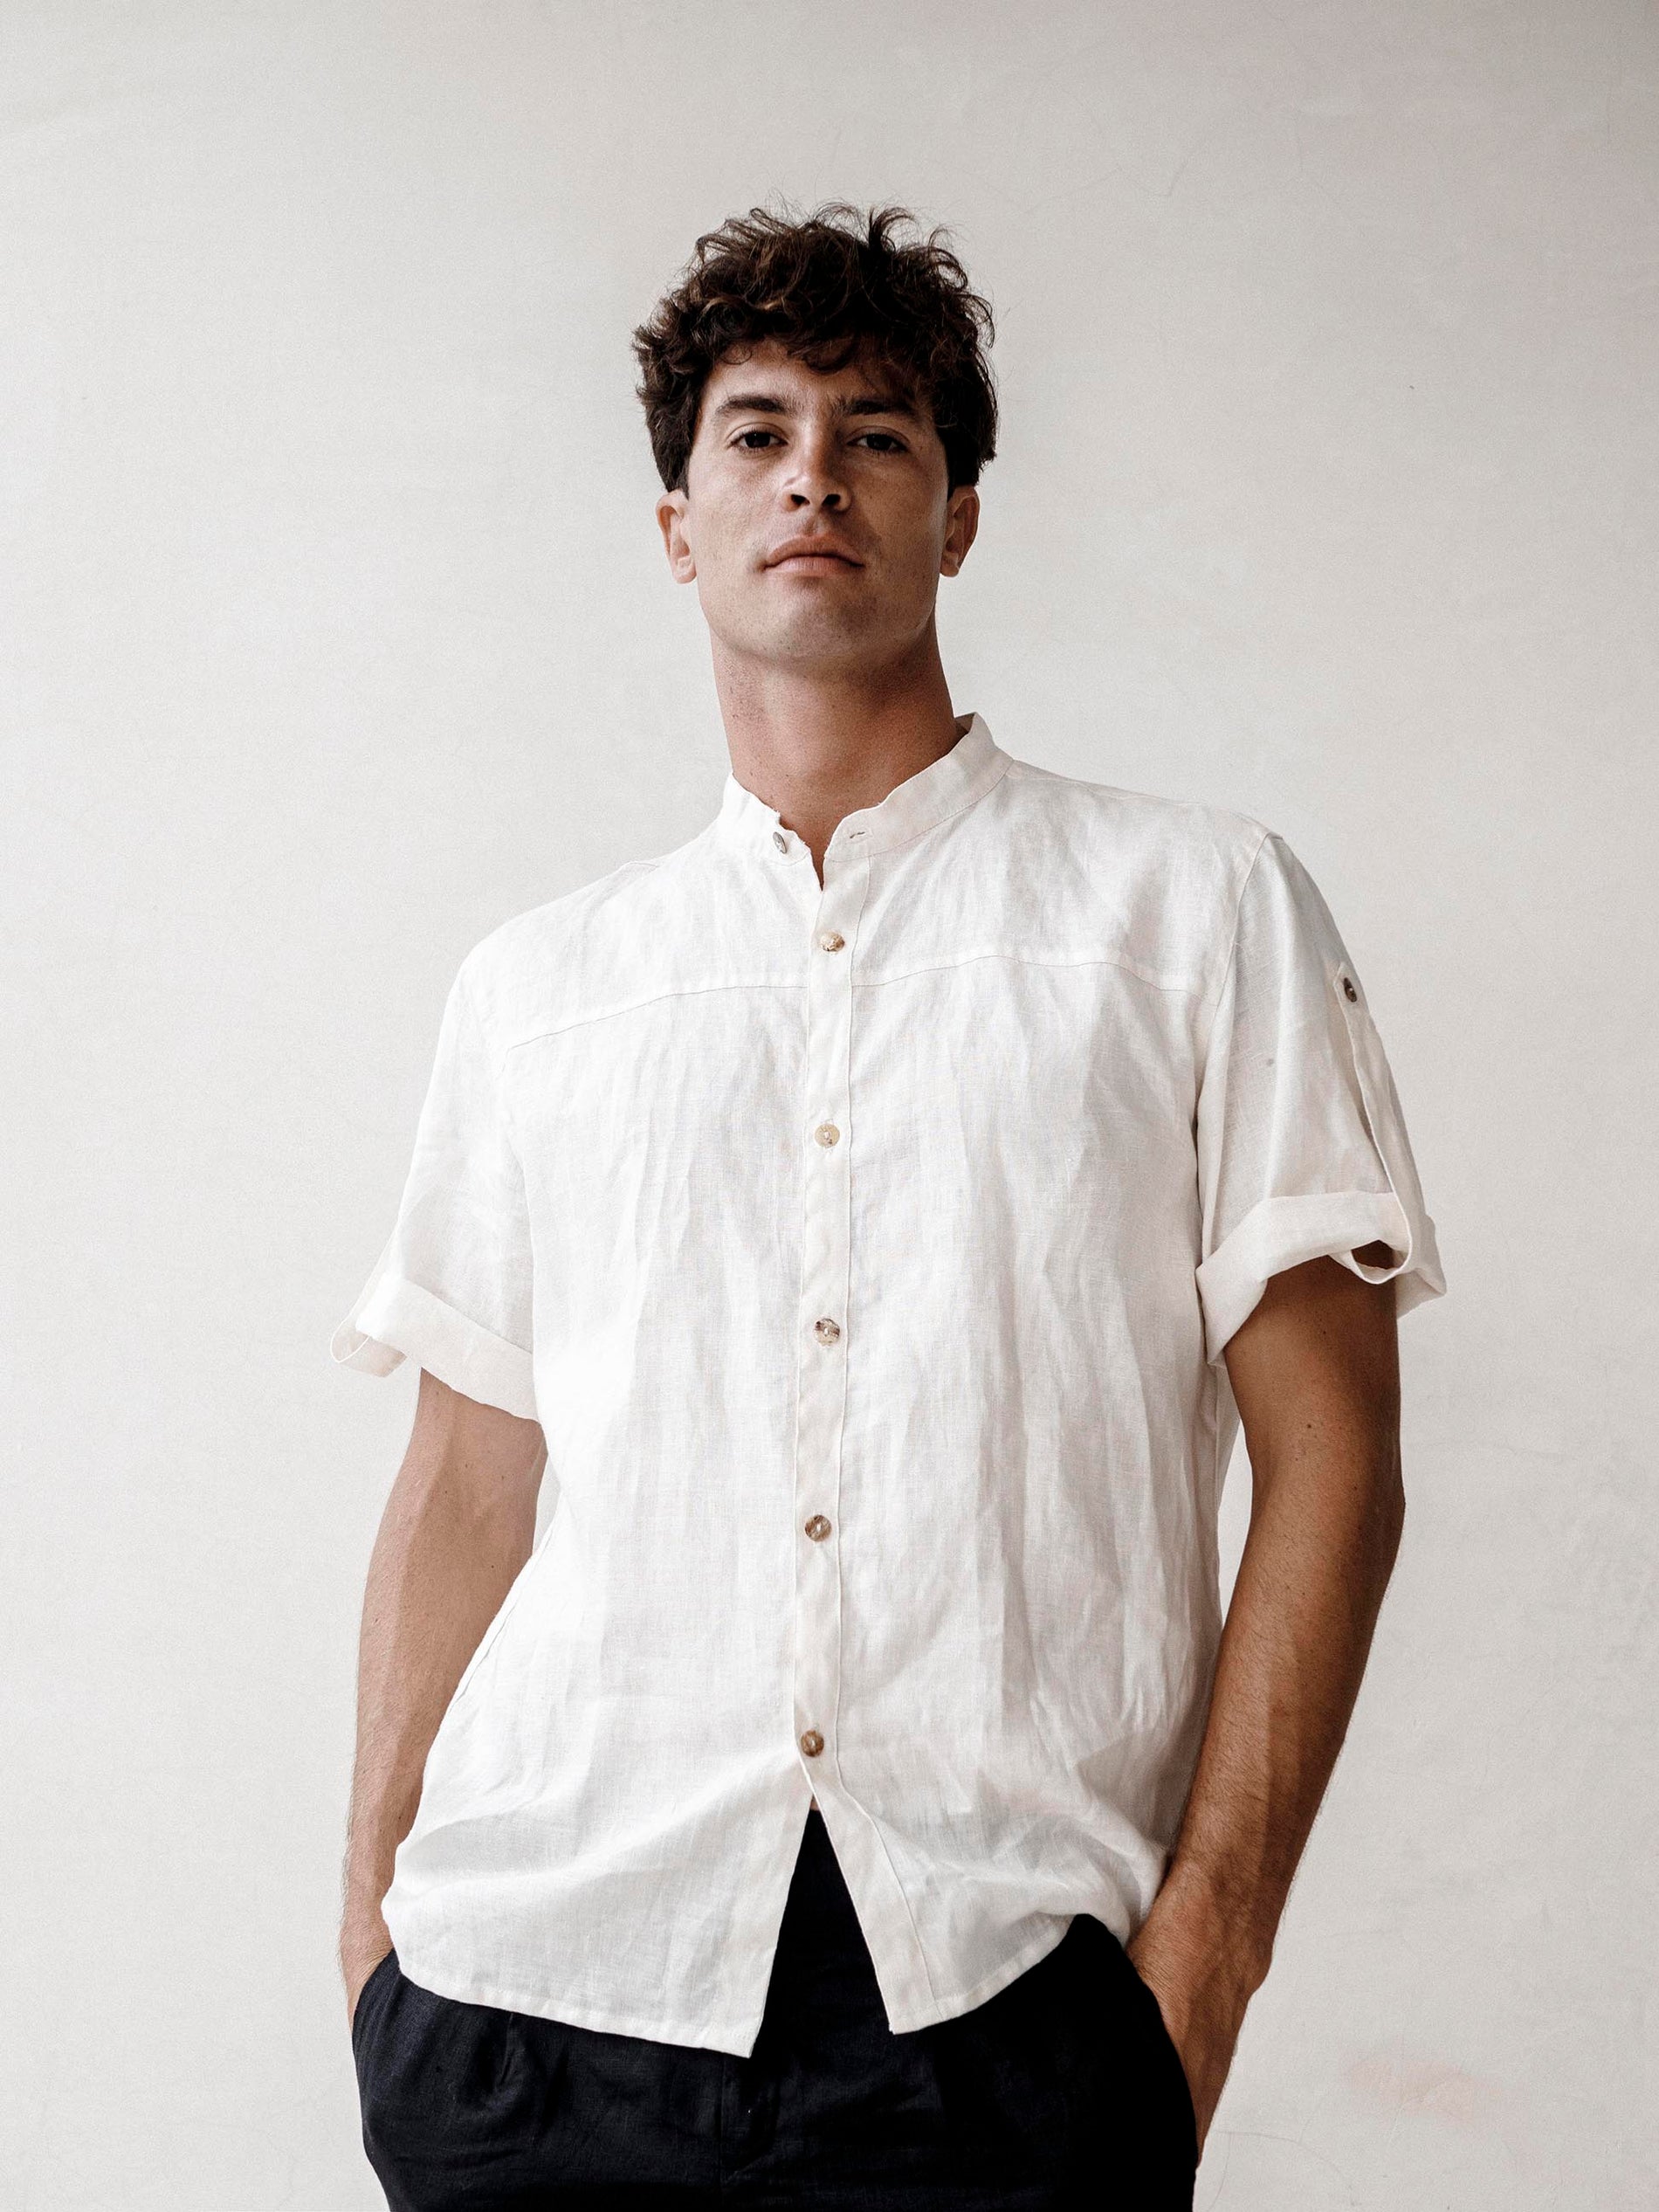 Men's Linen Safari Shirt, short sleeves, button down︱ - In the Middle Tulum